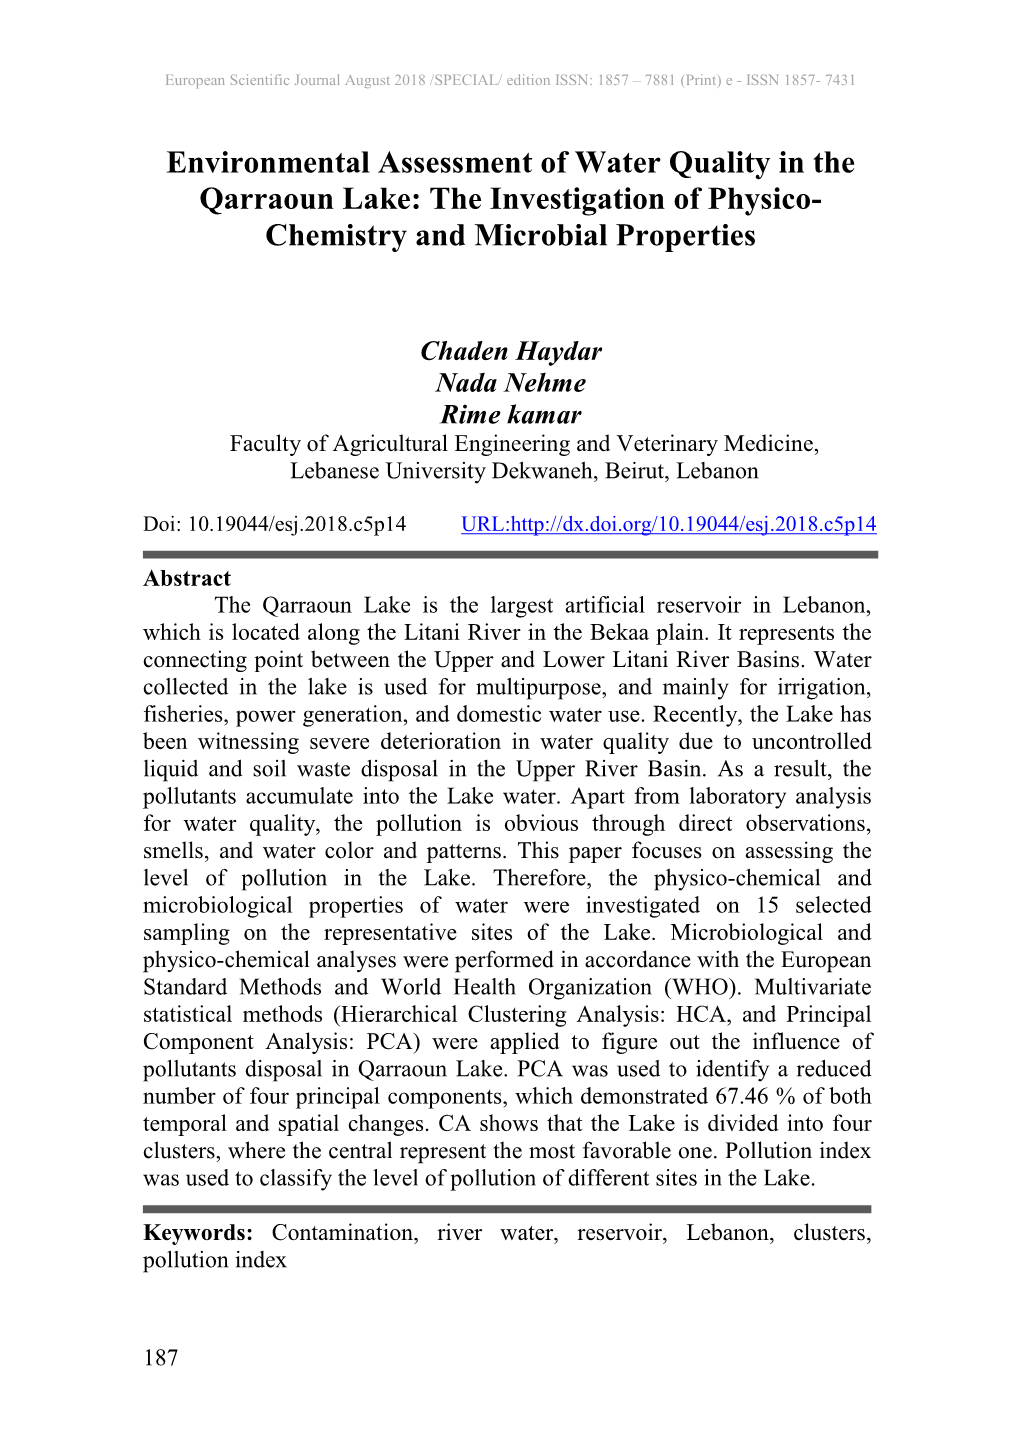 Environmental Assessment of Water Quality in the Qarraoun Lake: the Investigation of Physico- Chemistry and Microbial Properties